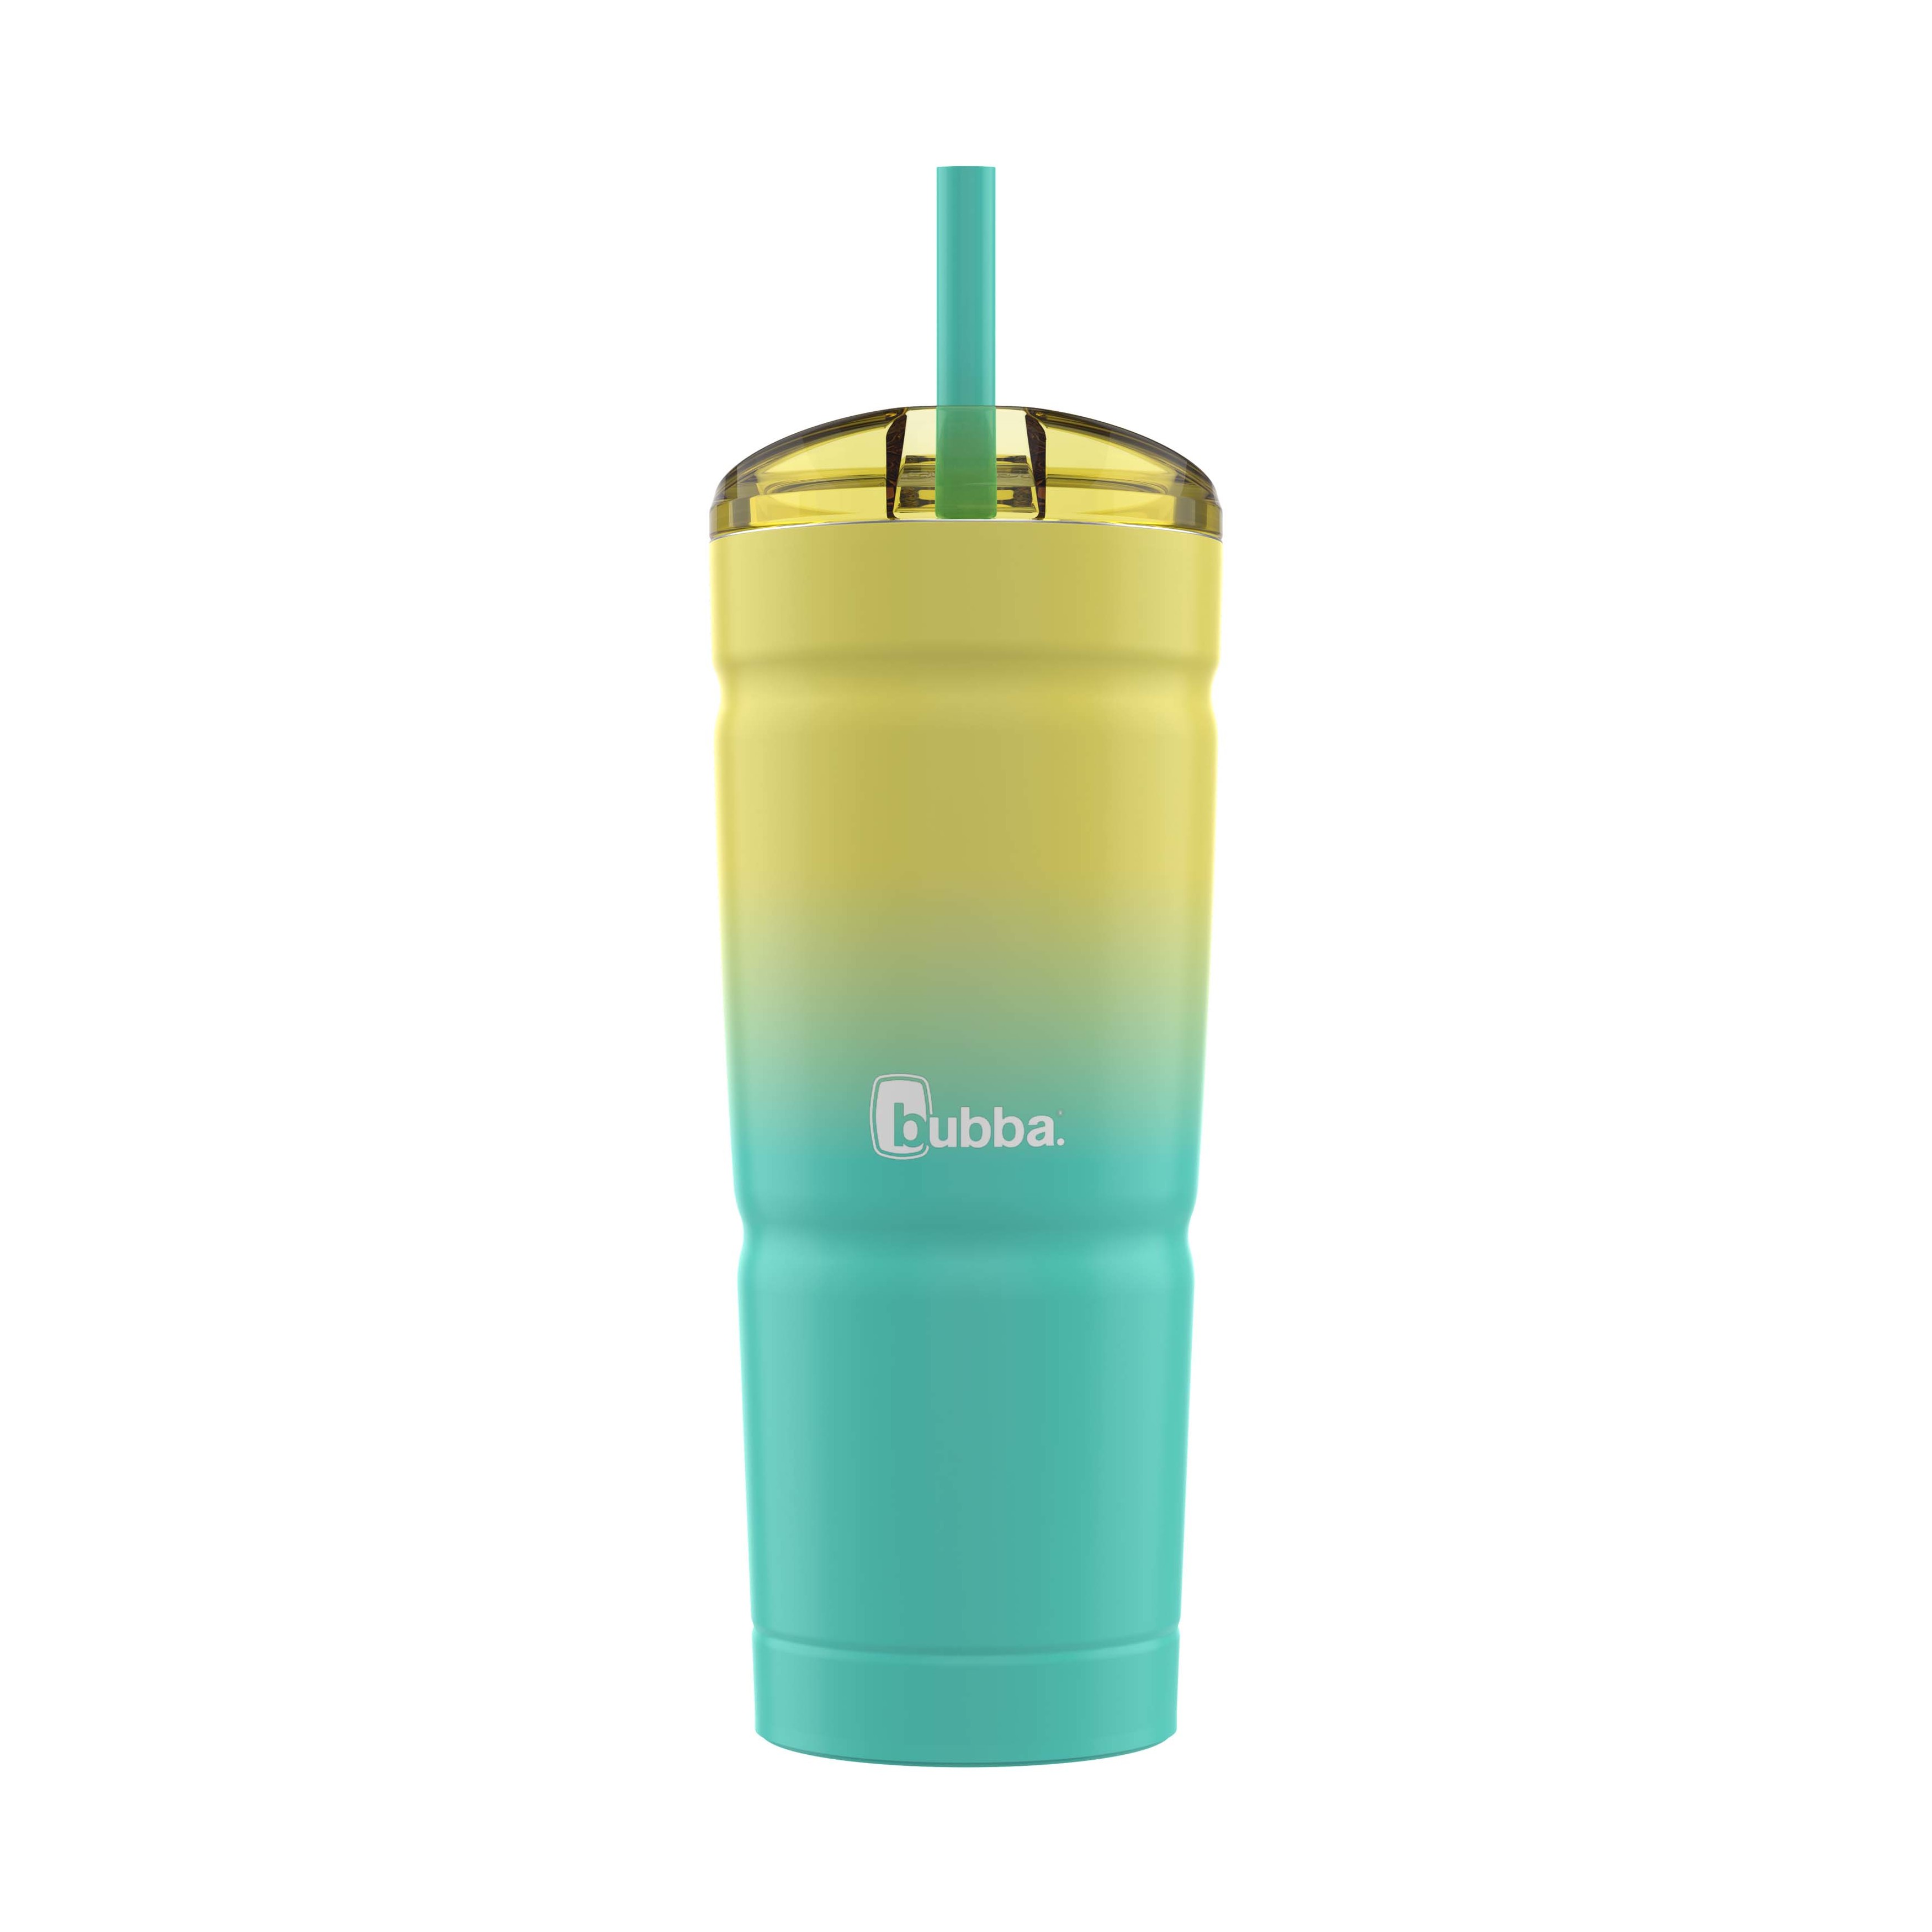 bubba Envy S Insulated Stainless Steel Tumbler with Straw, 24 Oz., Ombre - image 3 of 6